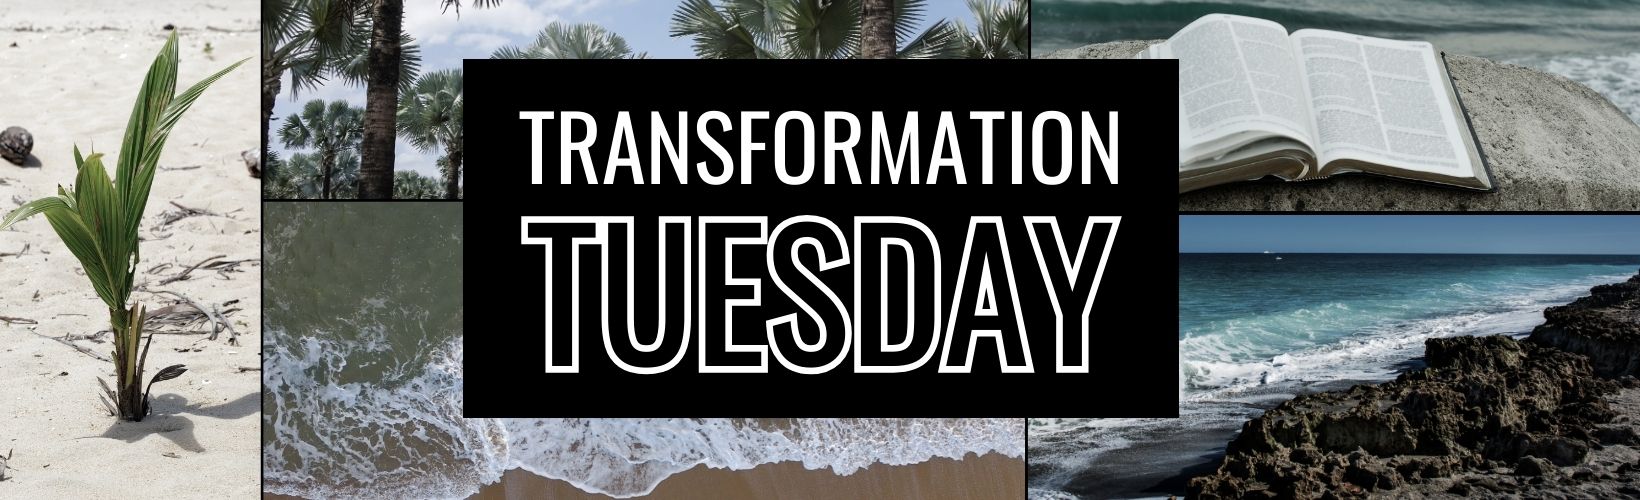 Transformation Tuesday: How to Transform Your Emotions and Improve Your Mood